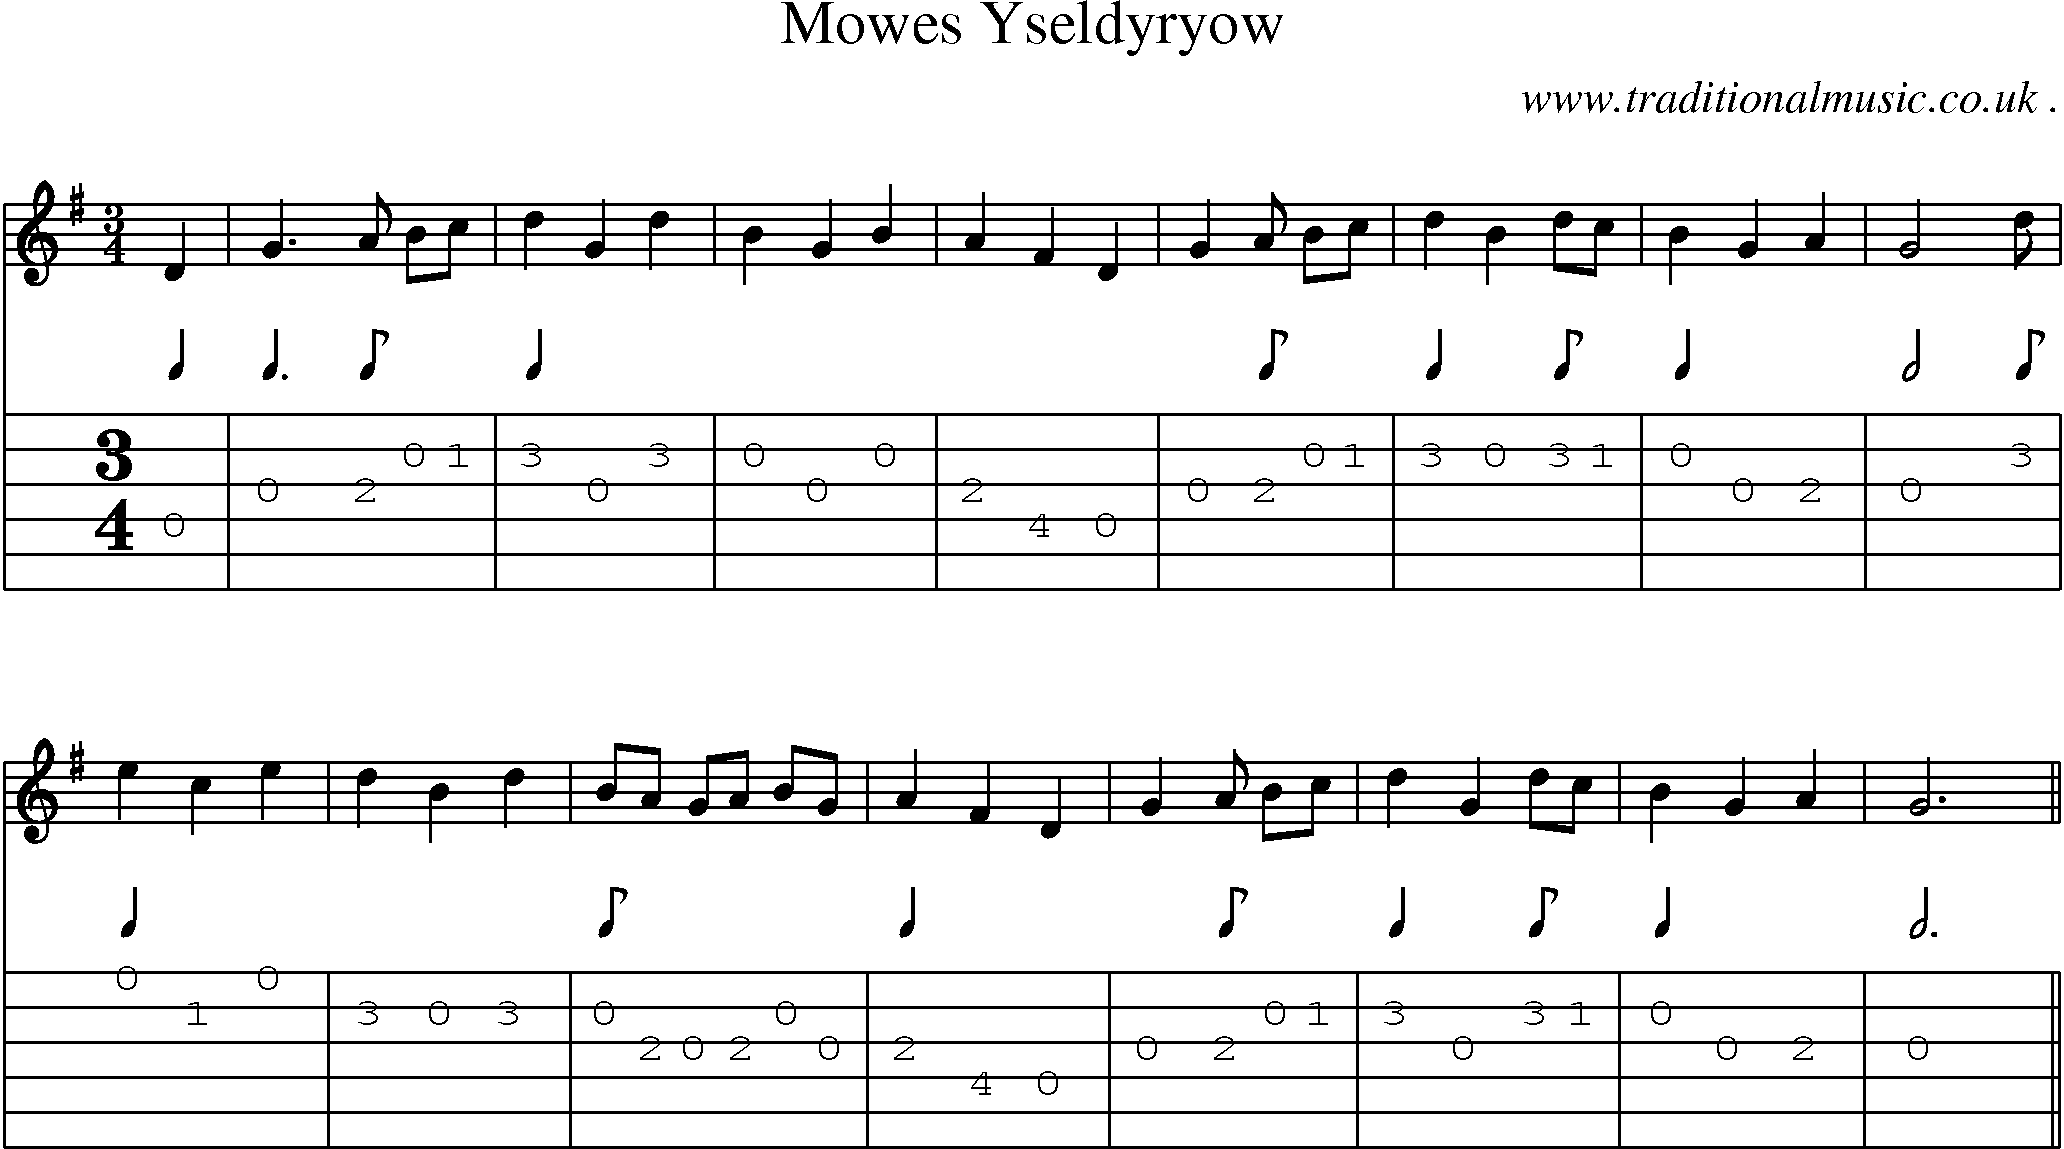 Sheet-Music and Guitar Tabs for Mowes Yseldyryow